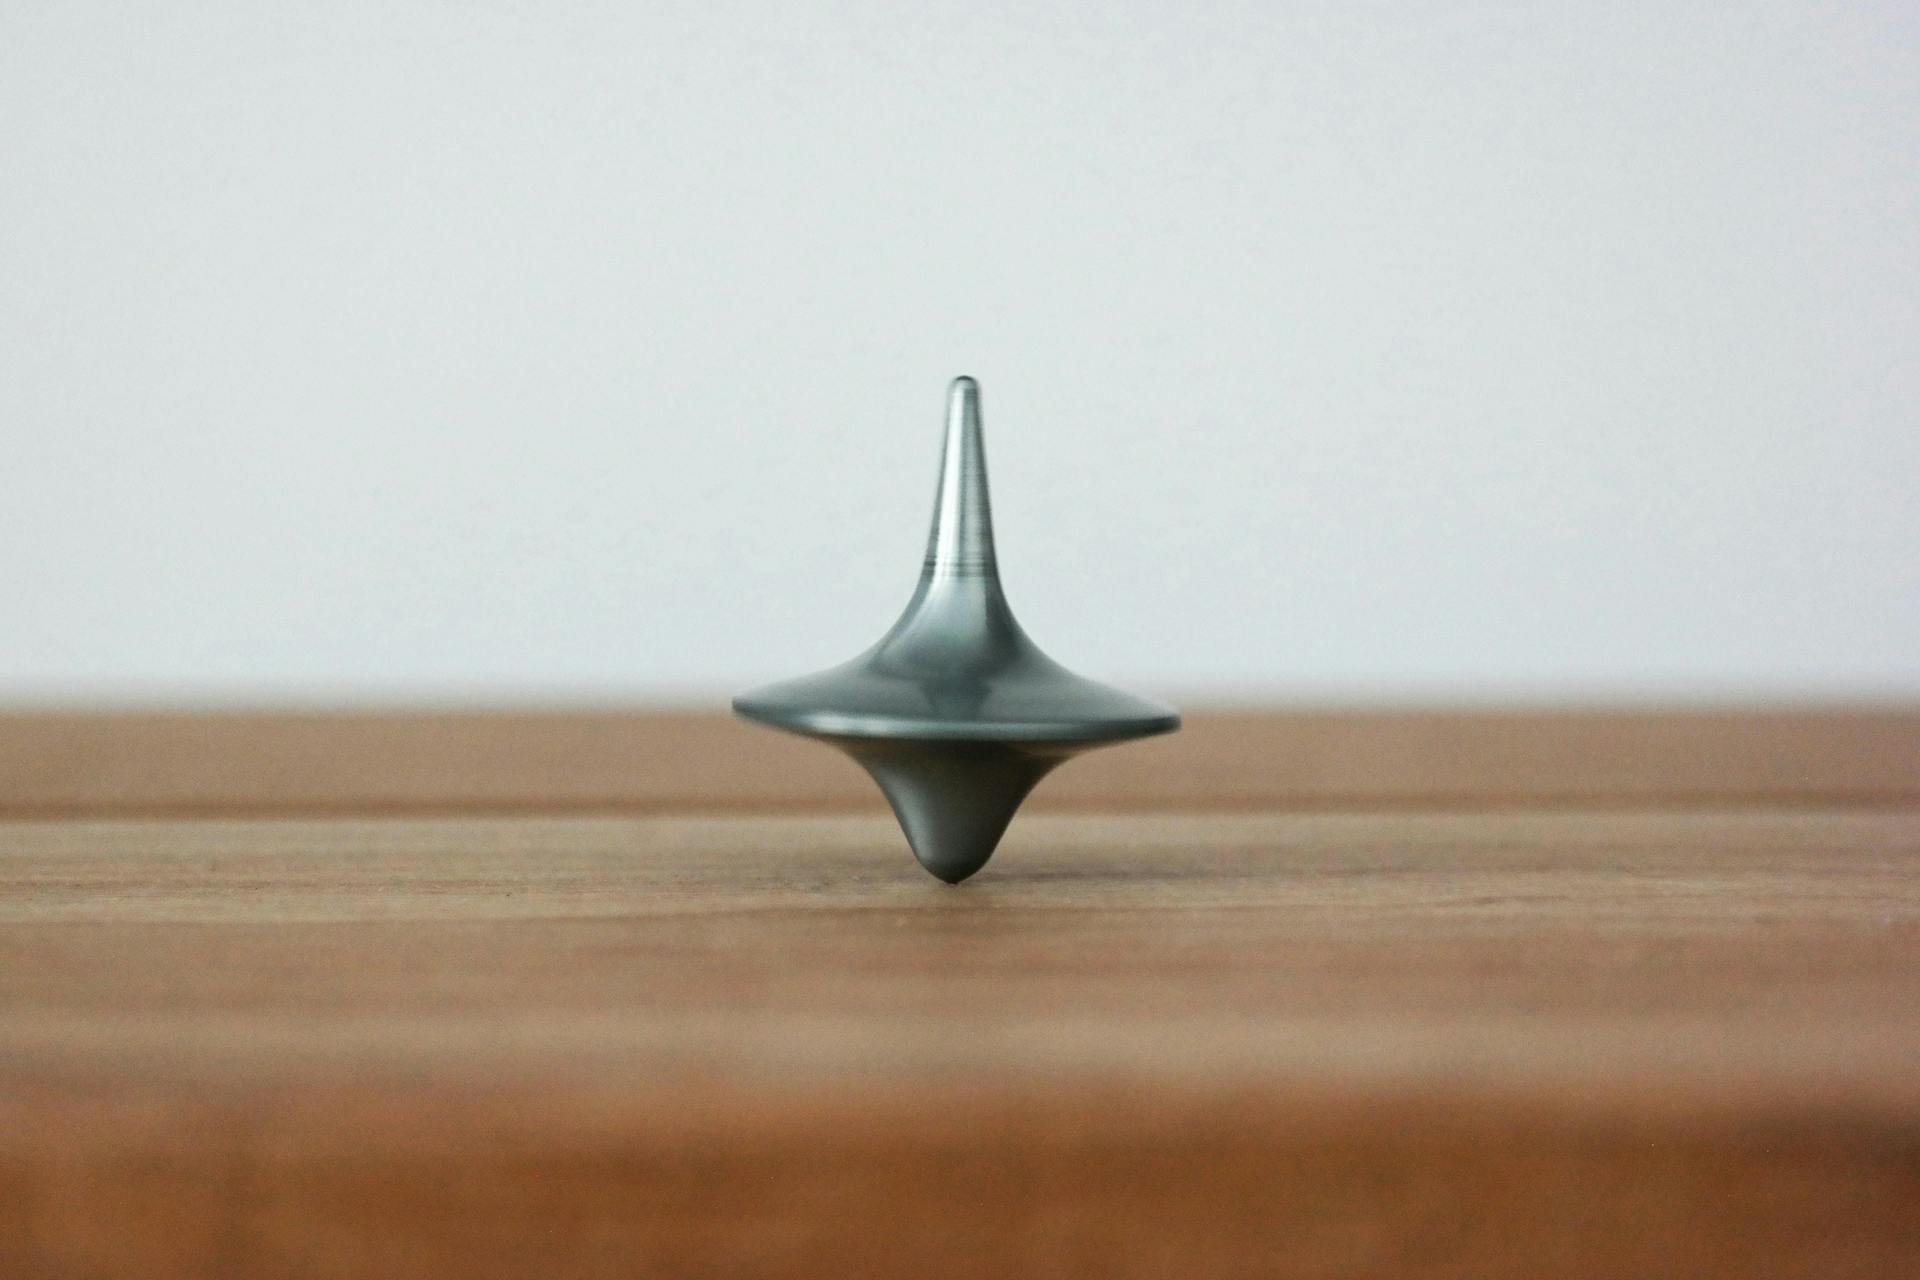 Childs spinning top toy balancing on a table. Looking at past metrics is important for writing a communication plan